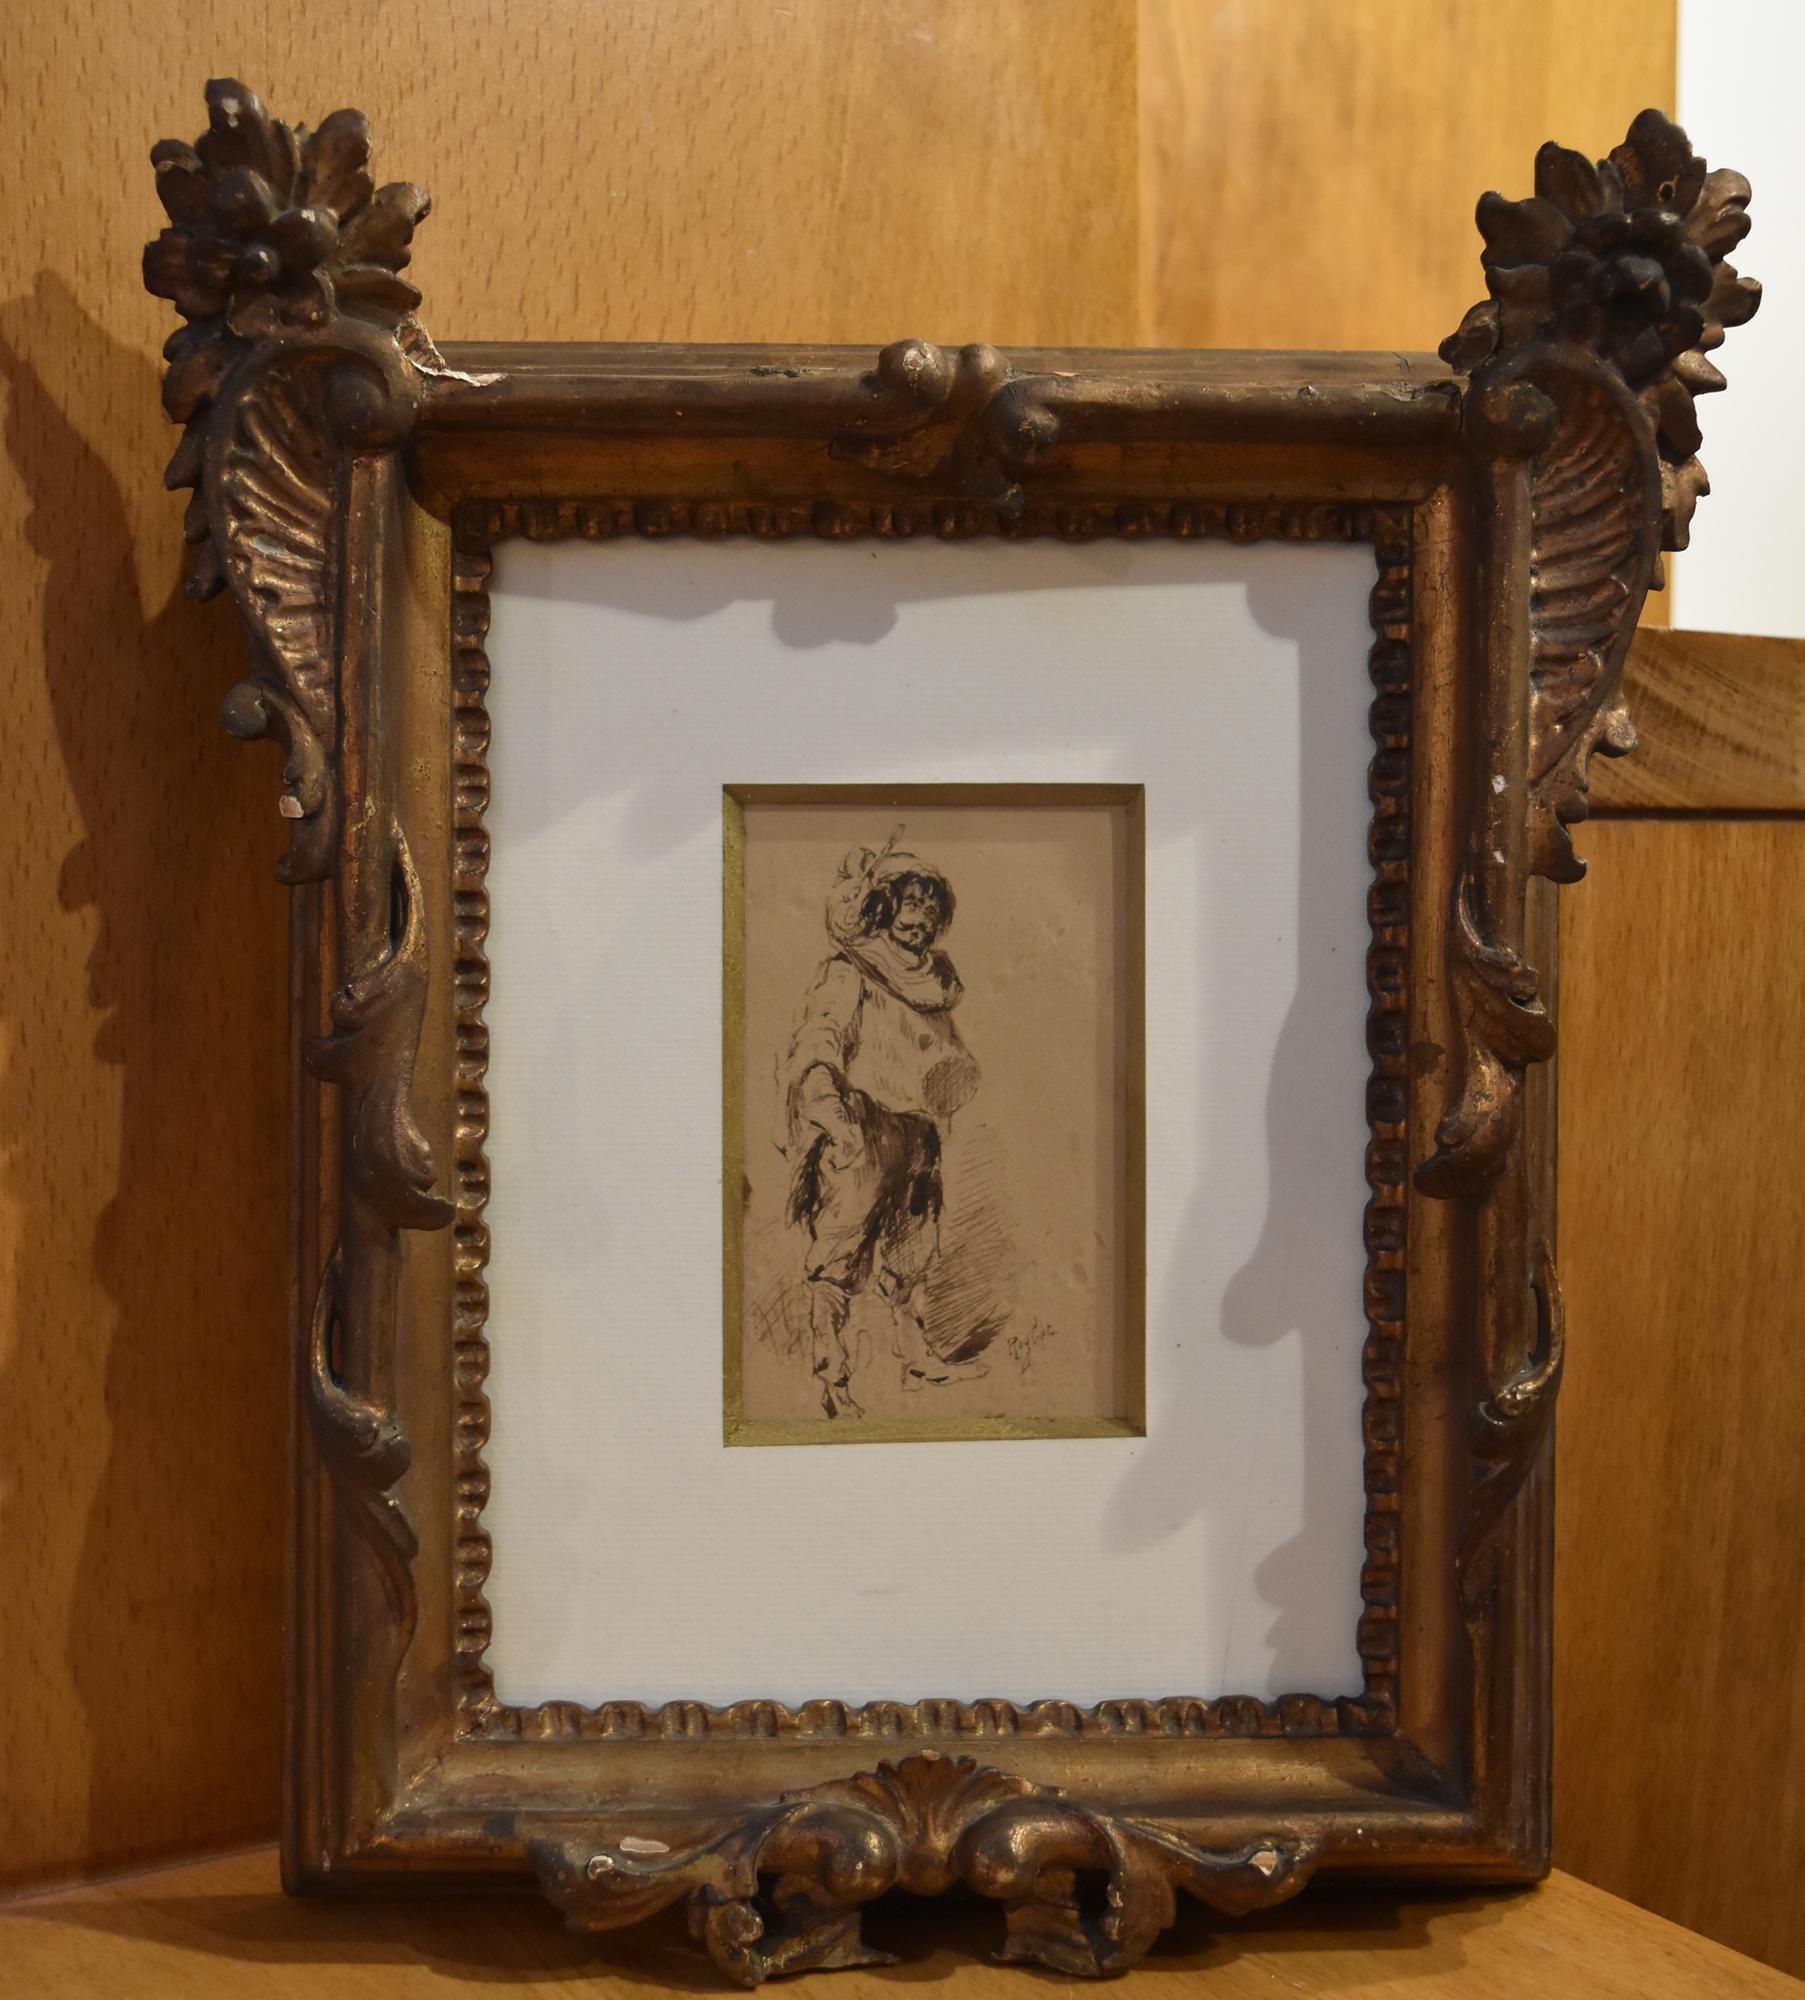 Ferdinand Roybet (1840-1920) A Musketeer, study, Drawing in its original frame - Art by Ferdinand Victor Leon Roybet 